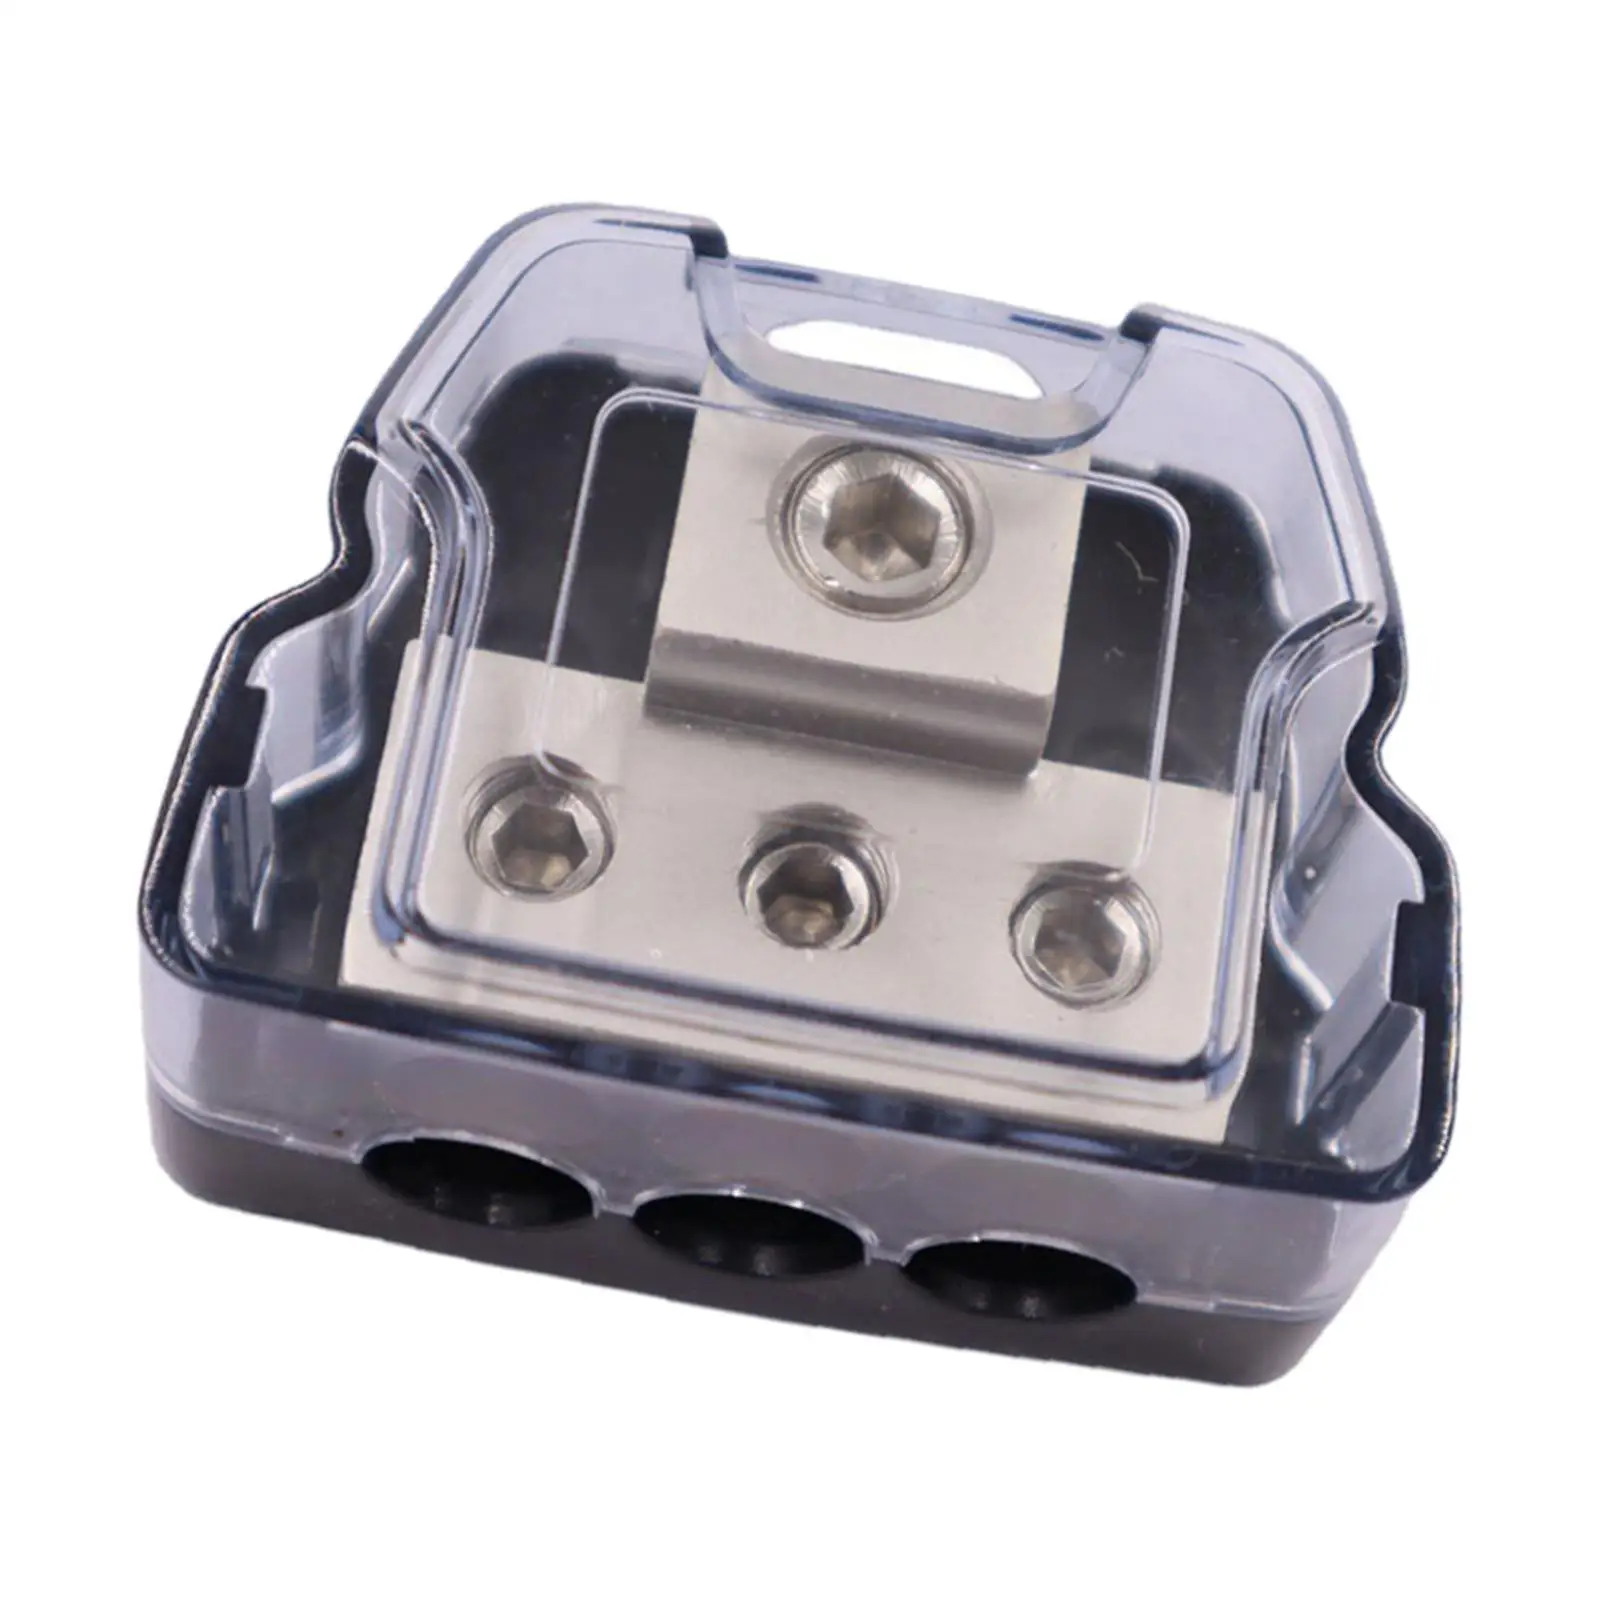 Power Distribution Block, 3 Way 1x 0 Gauge AWG in, 3x 4 Gauge AWG Out Fits for Boat Vehicles